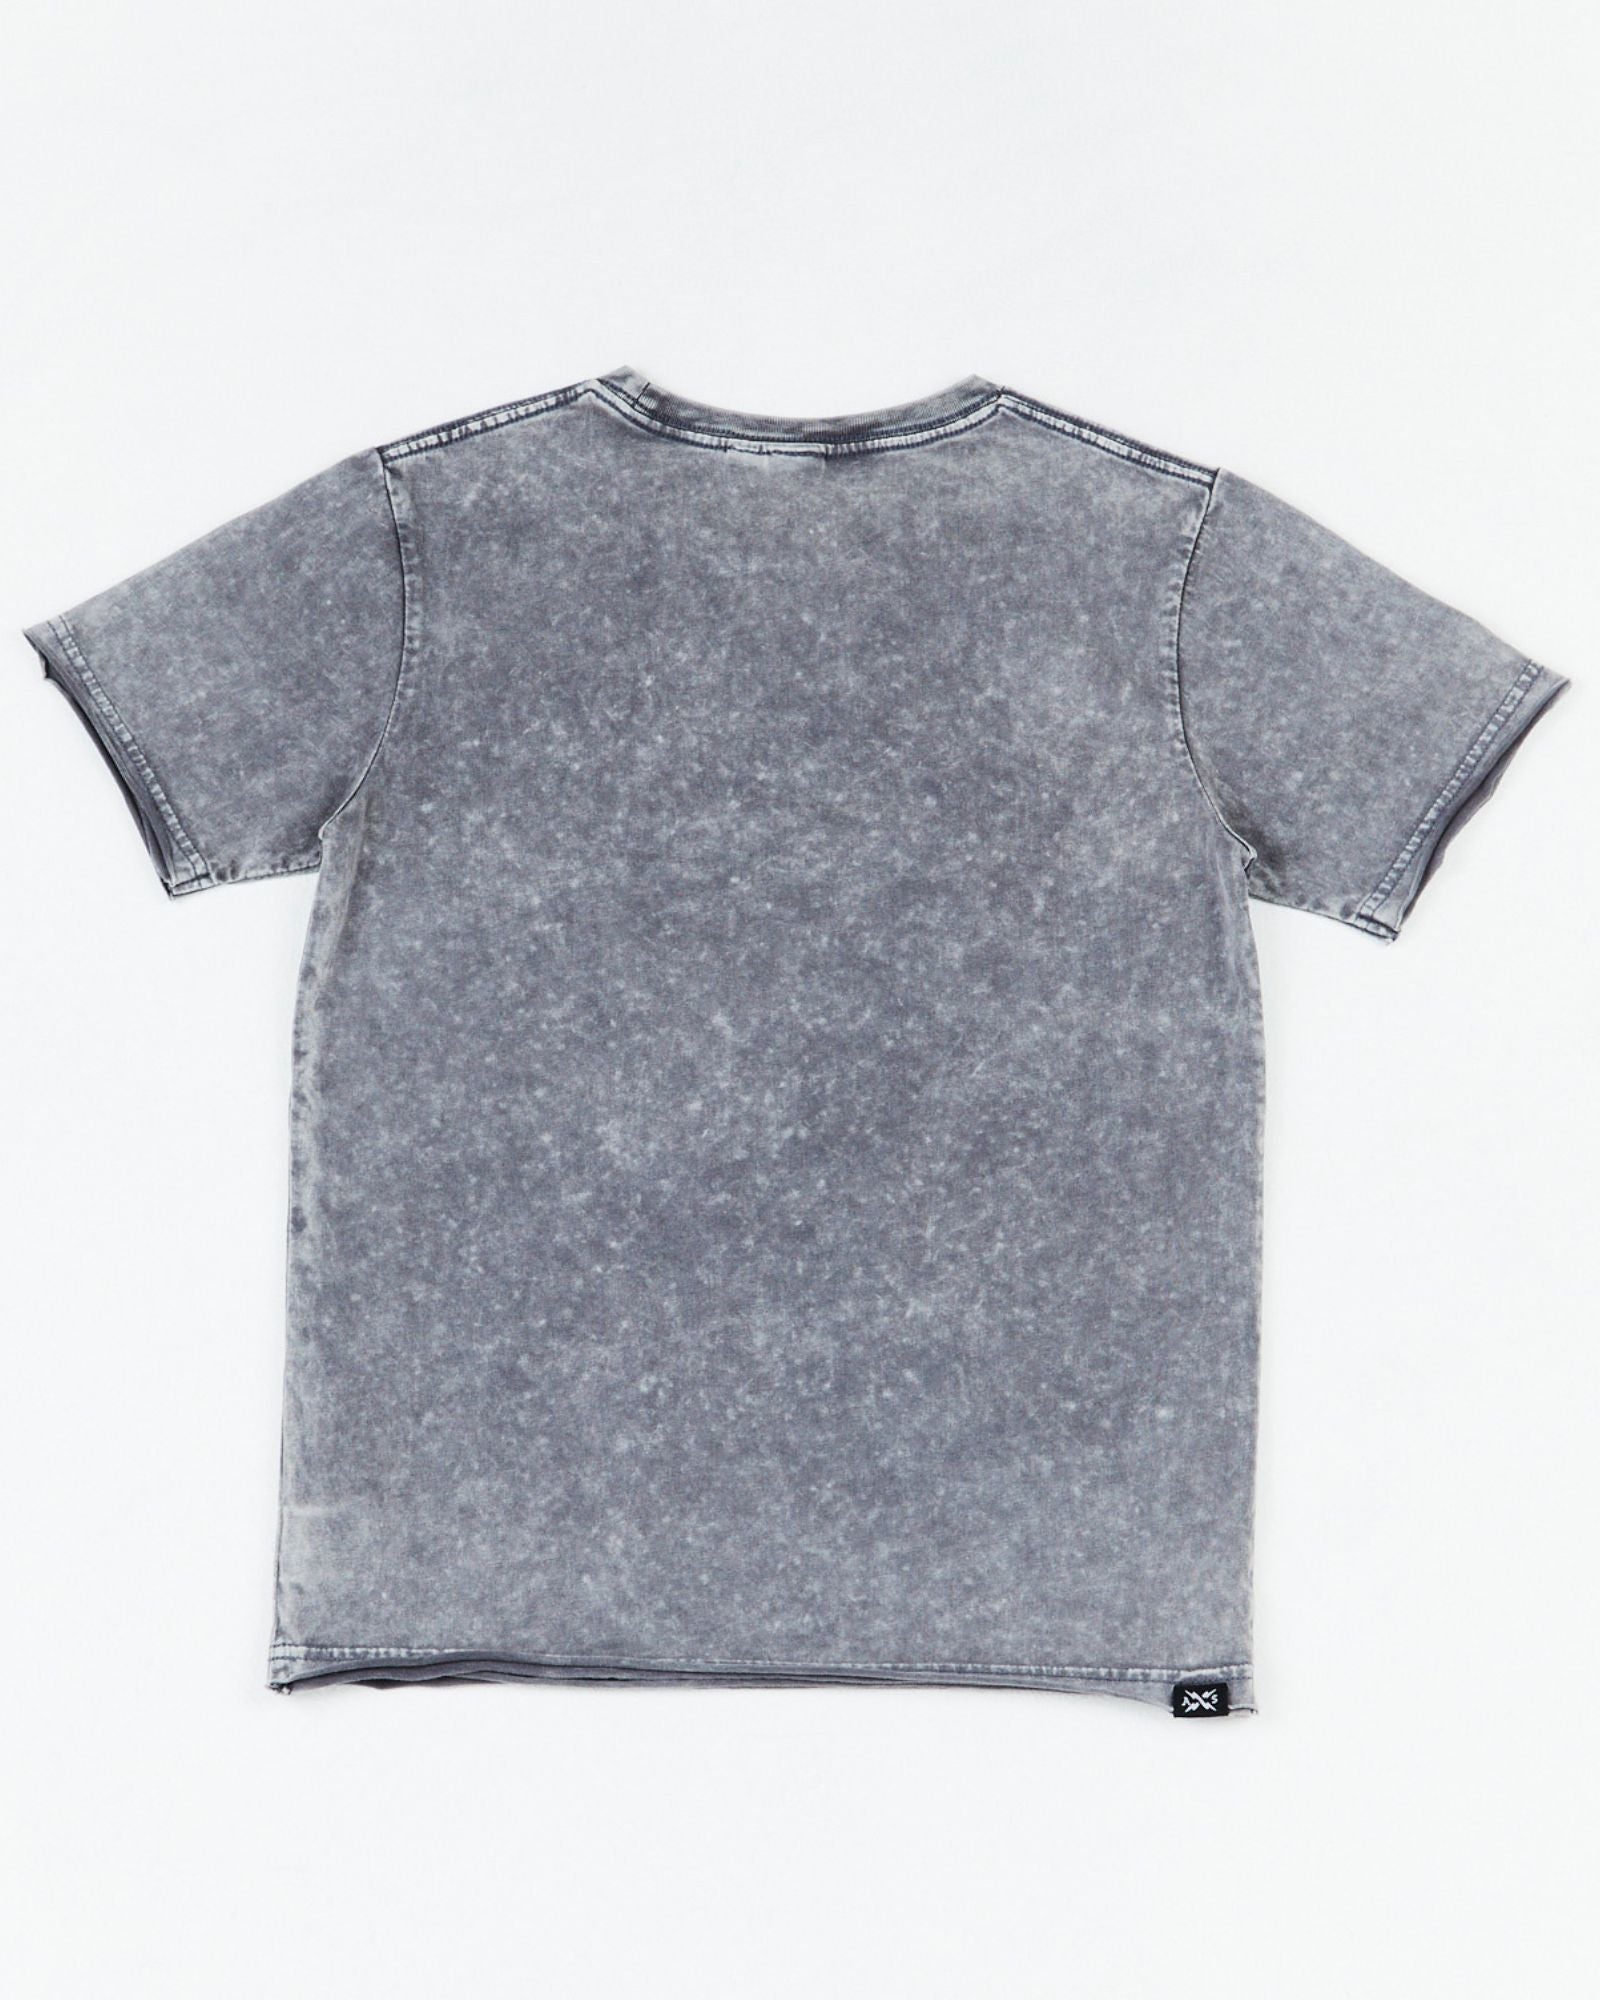 Alphabet Soup's Teen Staple Tee in pebble grey for boys aged 8-16. Featuring classic, 100% cotton jersey, has a regular fit, and raw edges on the hemline & sleeves. Plus, logo embroidery on the chest.